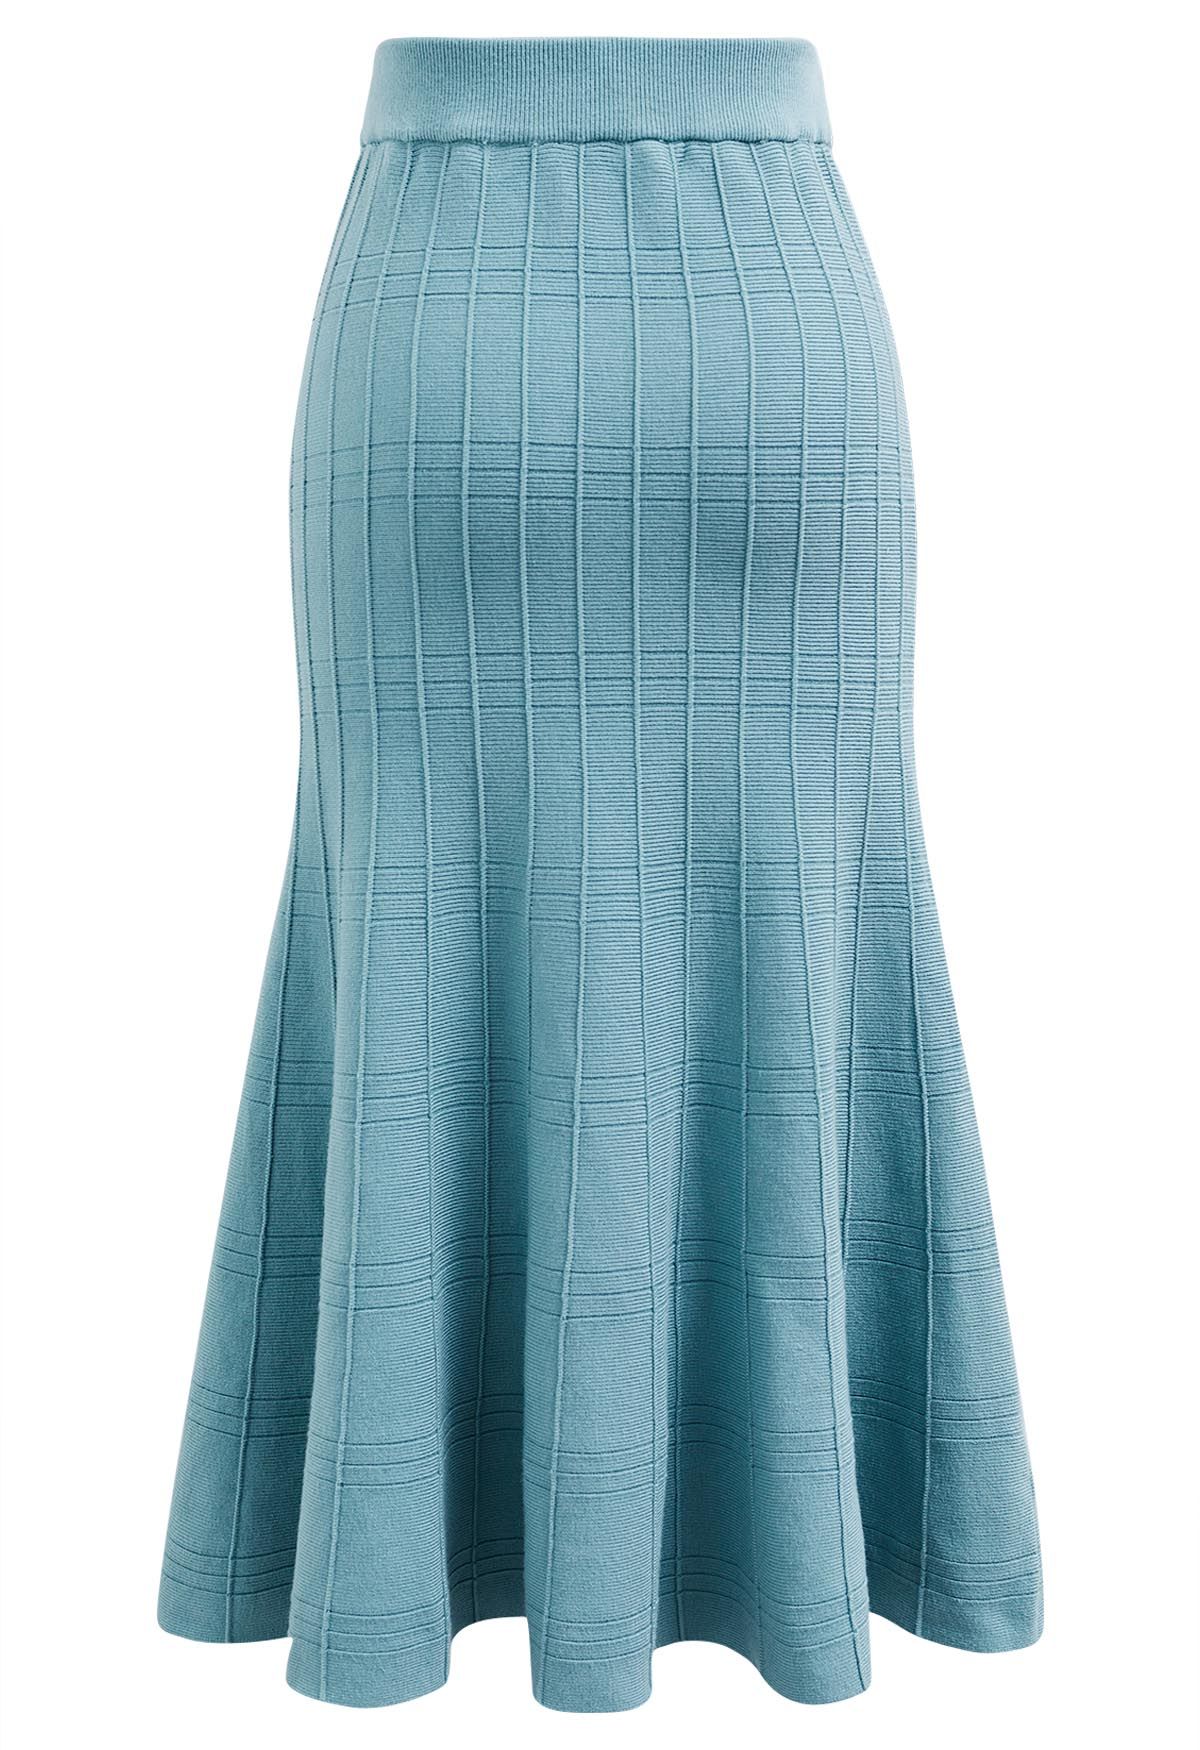 Seam Line Knit Mermaid Skirt in Turquoise - Retro, Indie and Unique Fashion